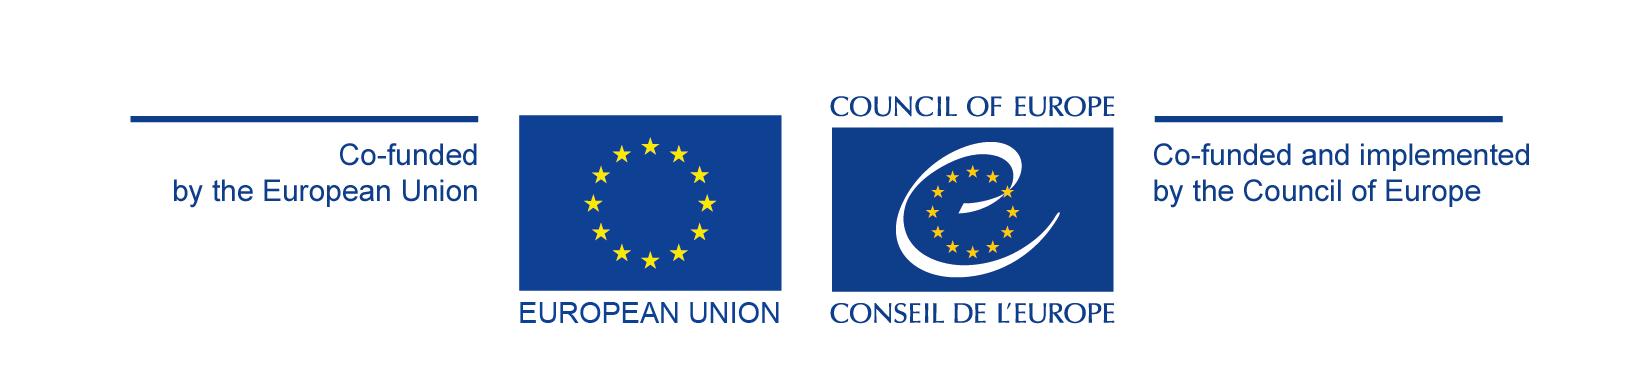 Funded by the European Union and implemented by the Council of Europe